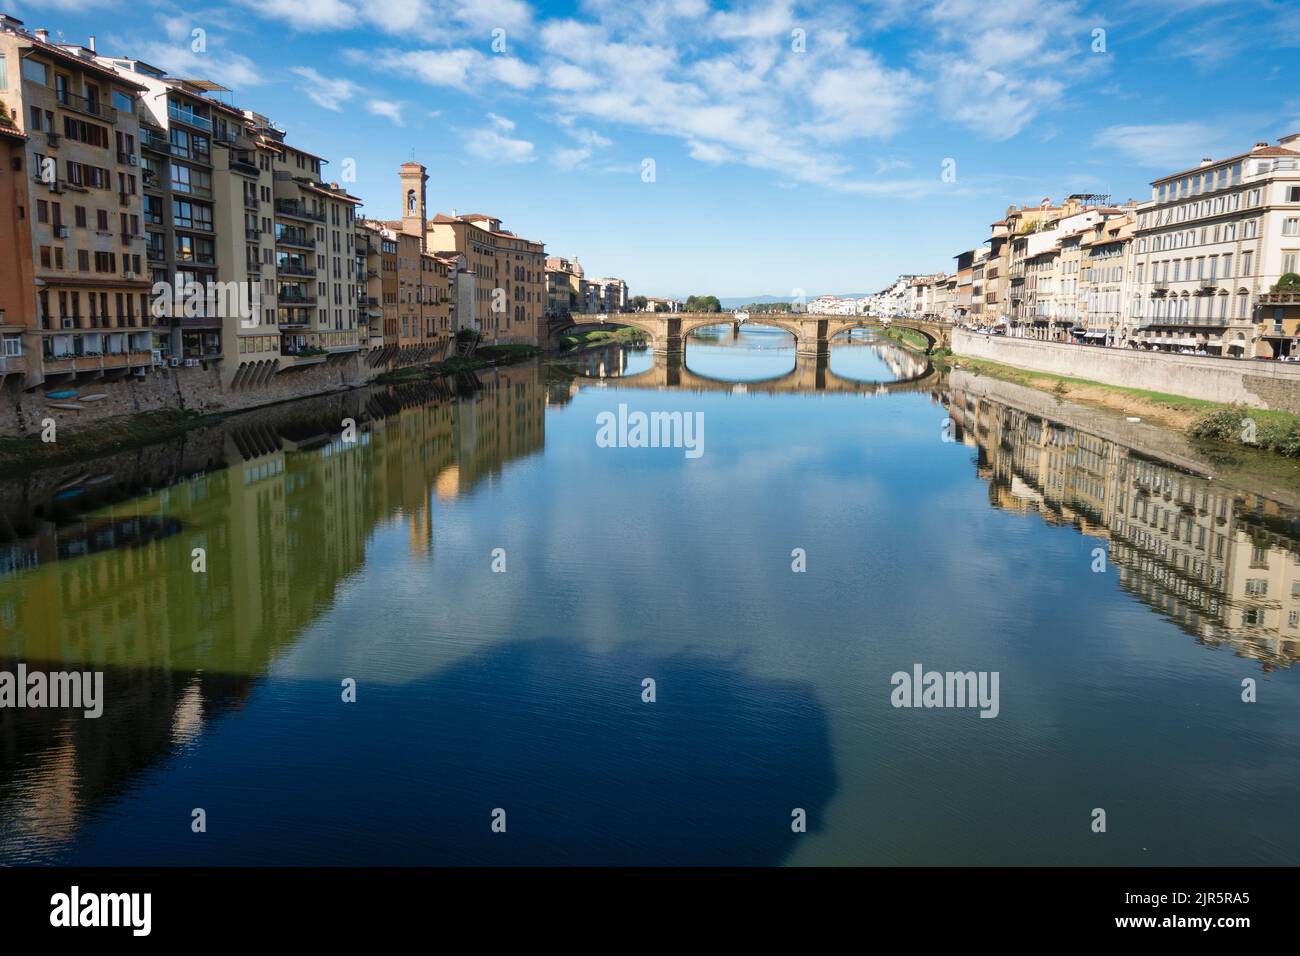 The Arno River flows through the city of Florence, Italy. Stock Photo